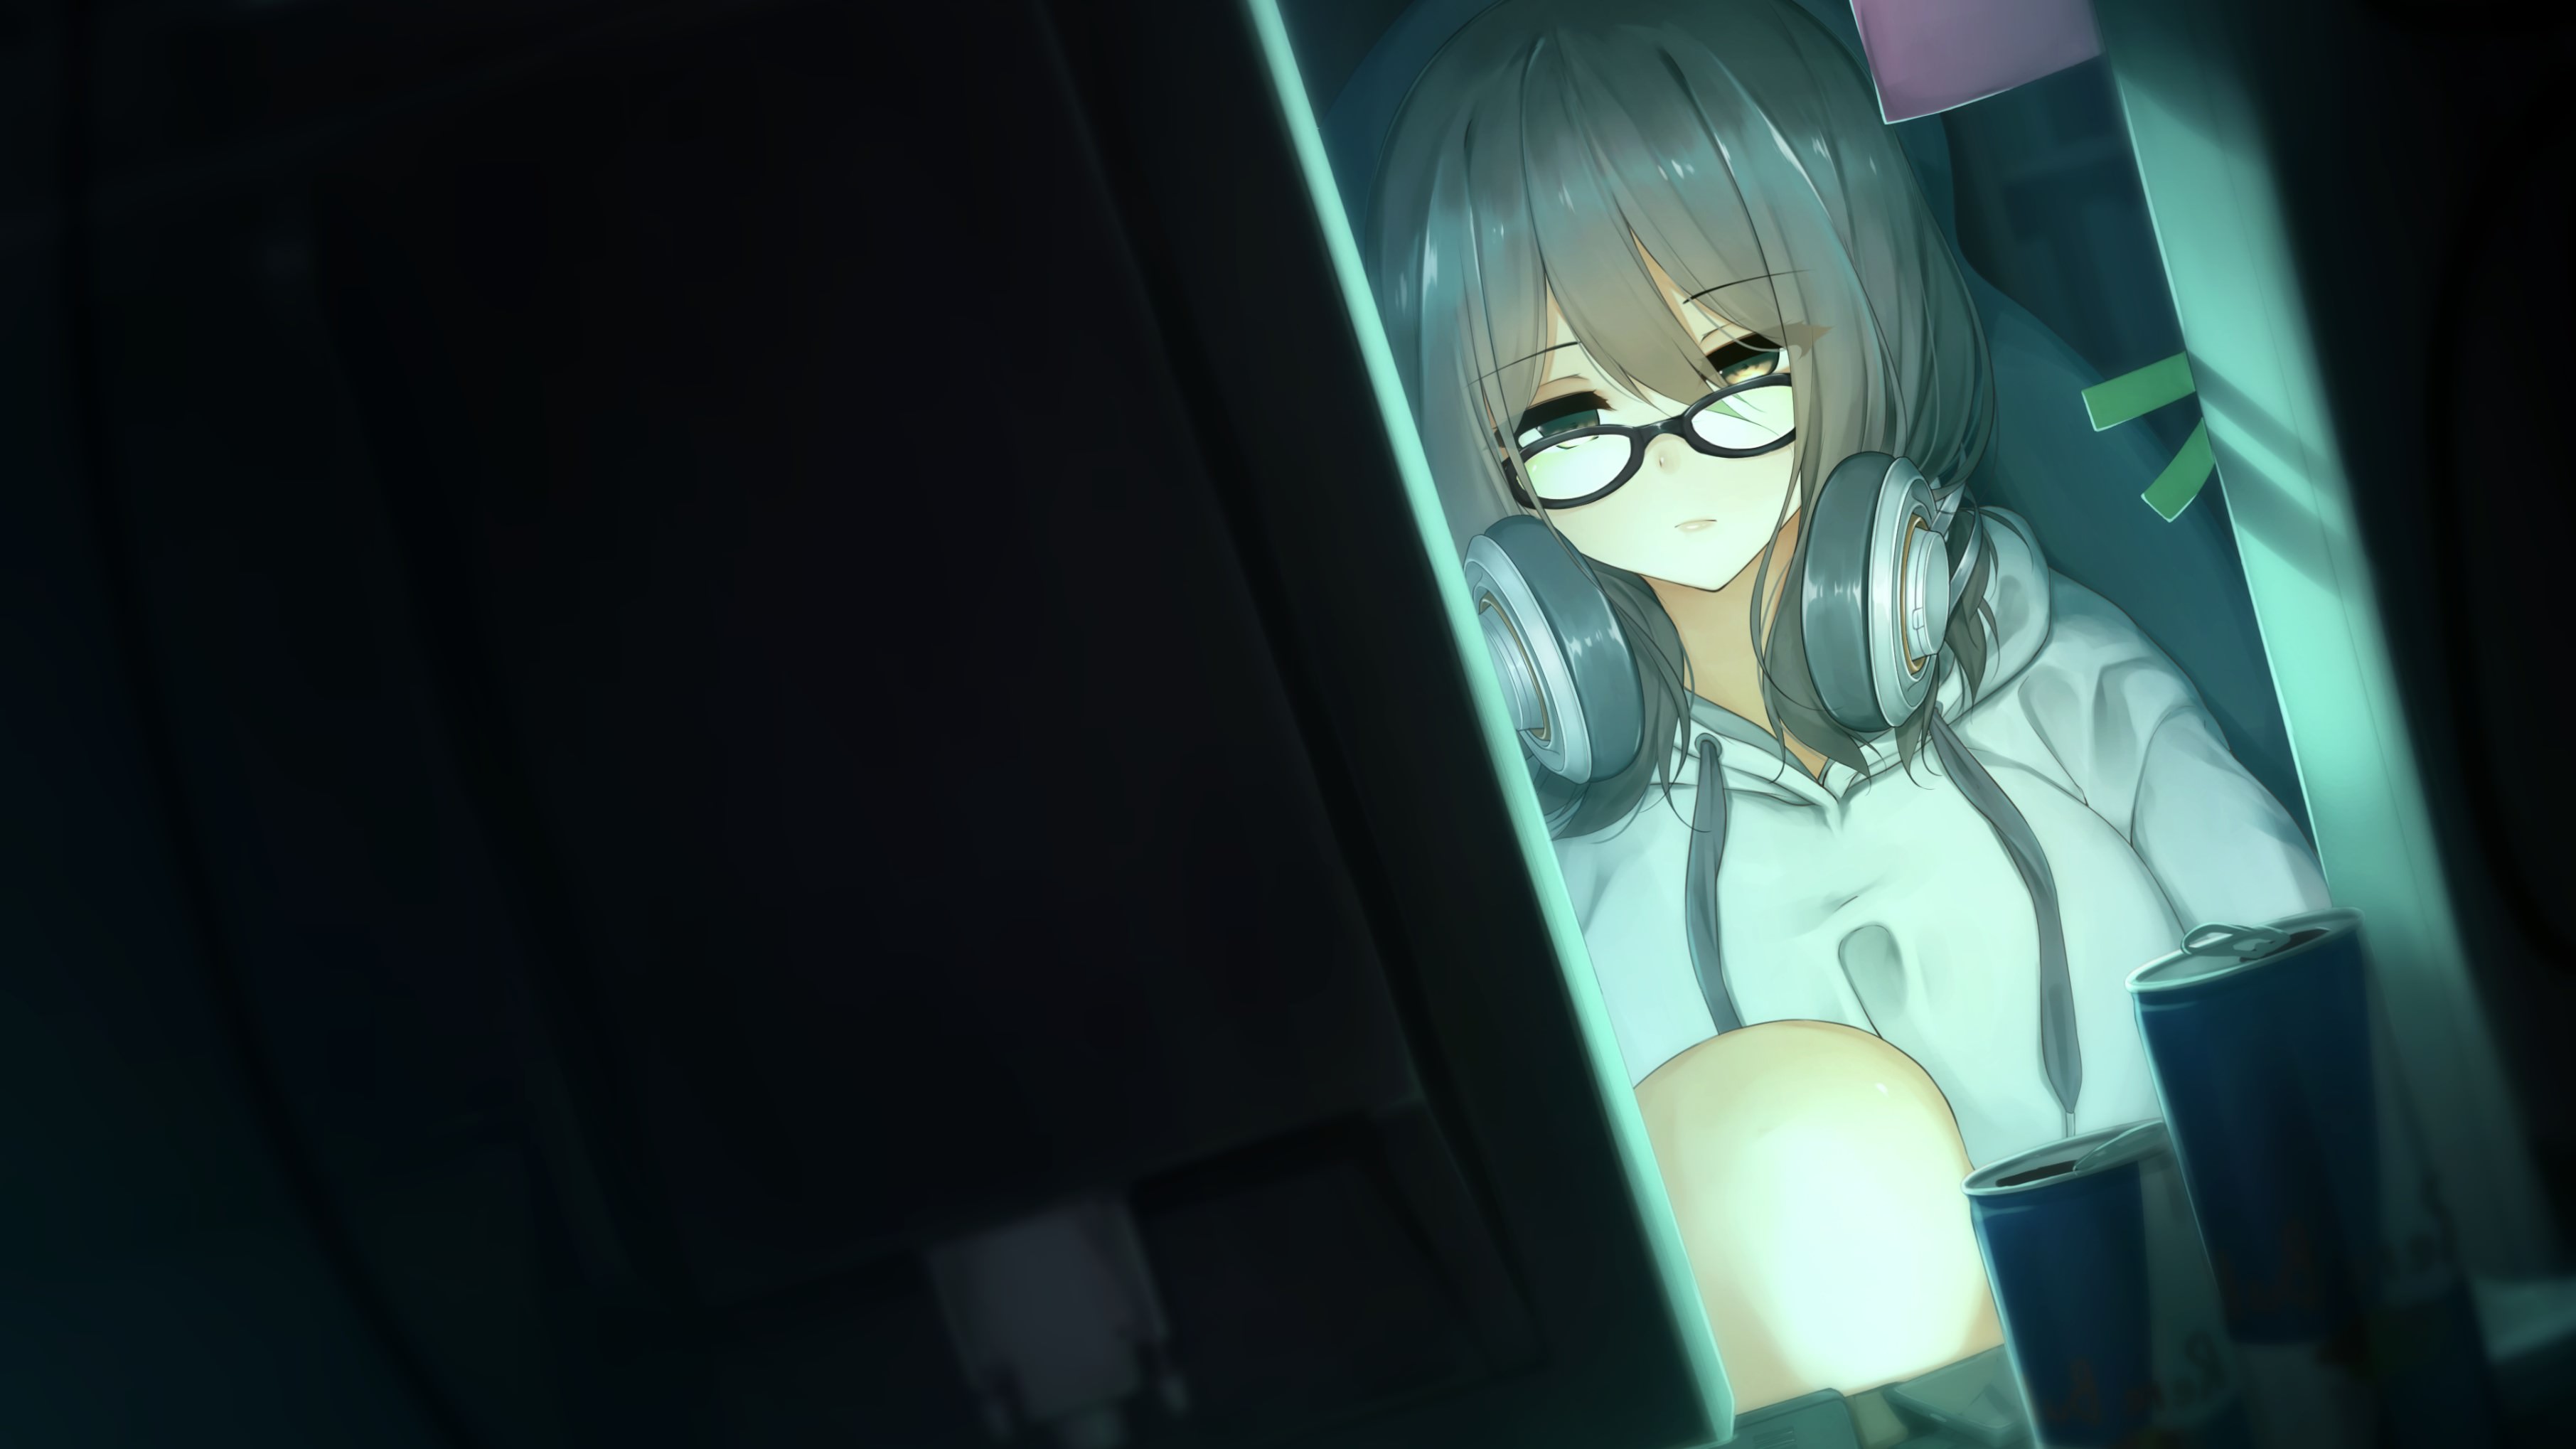 Anime 3623x2038 anime anime girls headphones glasses sweater energy drinks can food women with glasses monitor hair in face women indoors indoors long hair